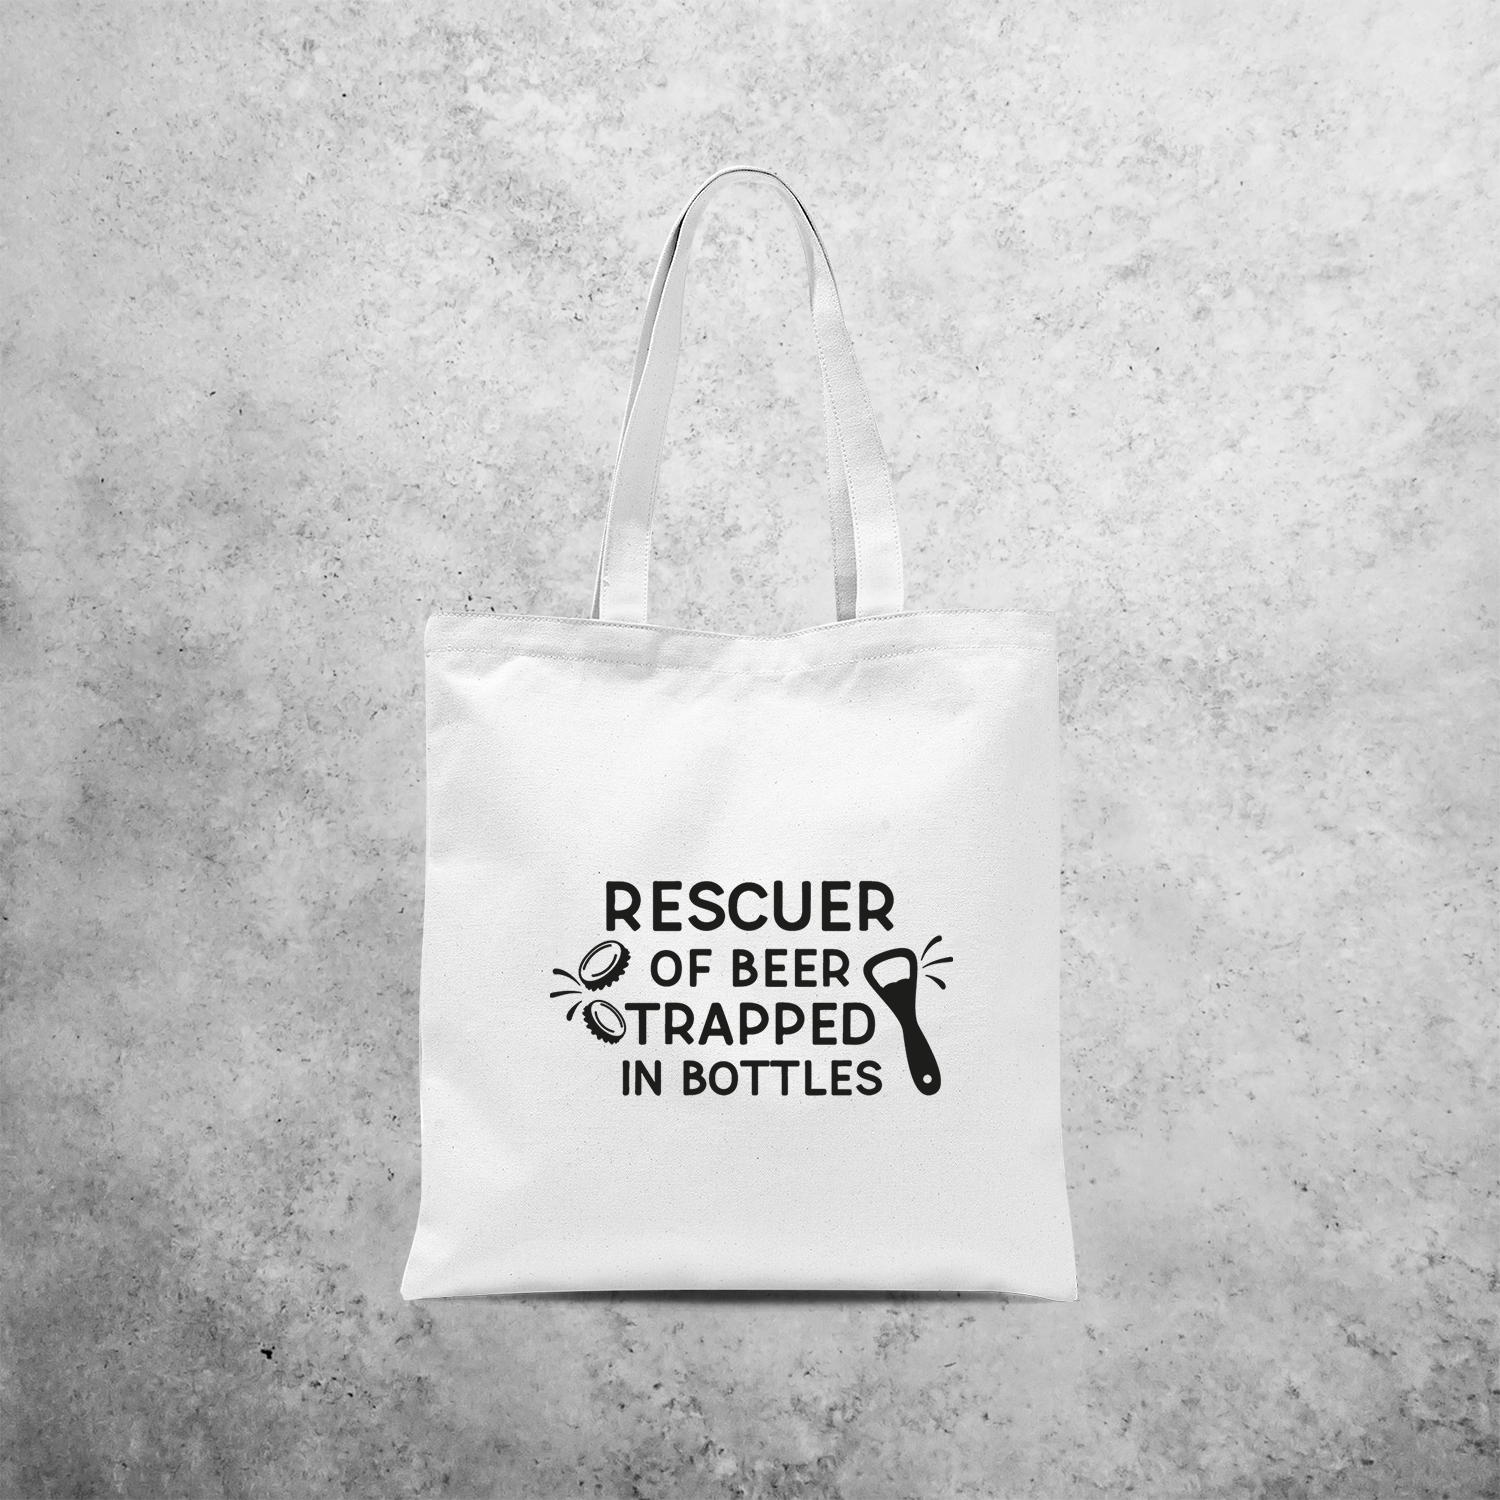 'Rescuer of beer trapped in bottles' tote bag